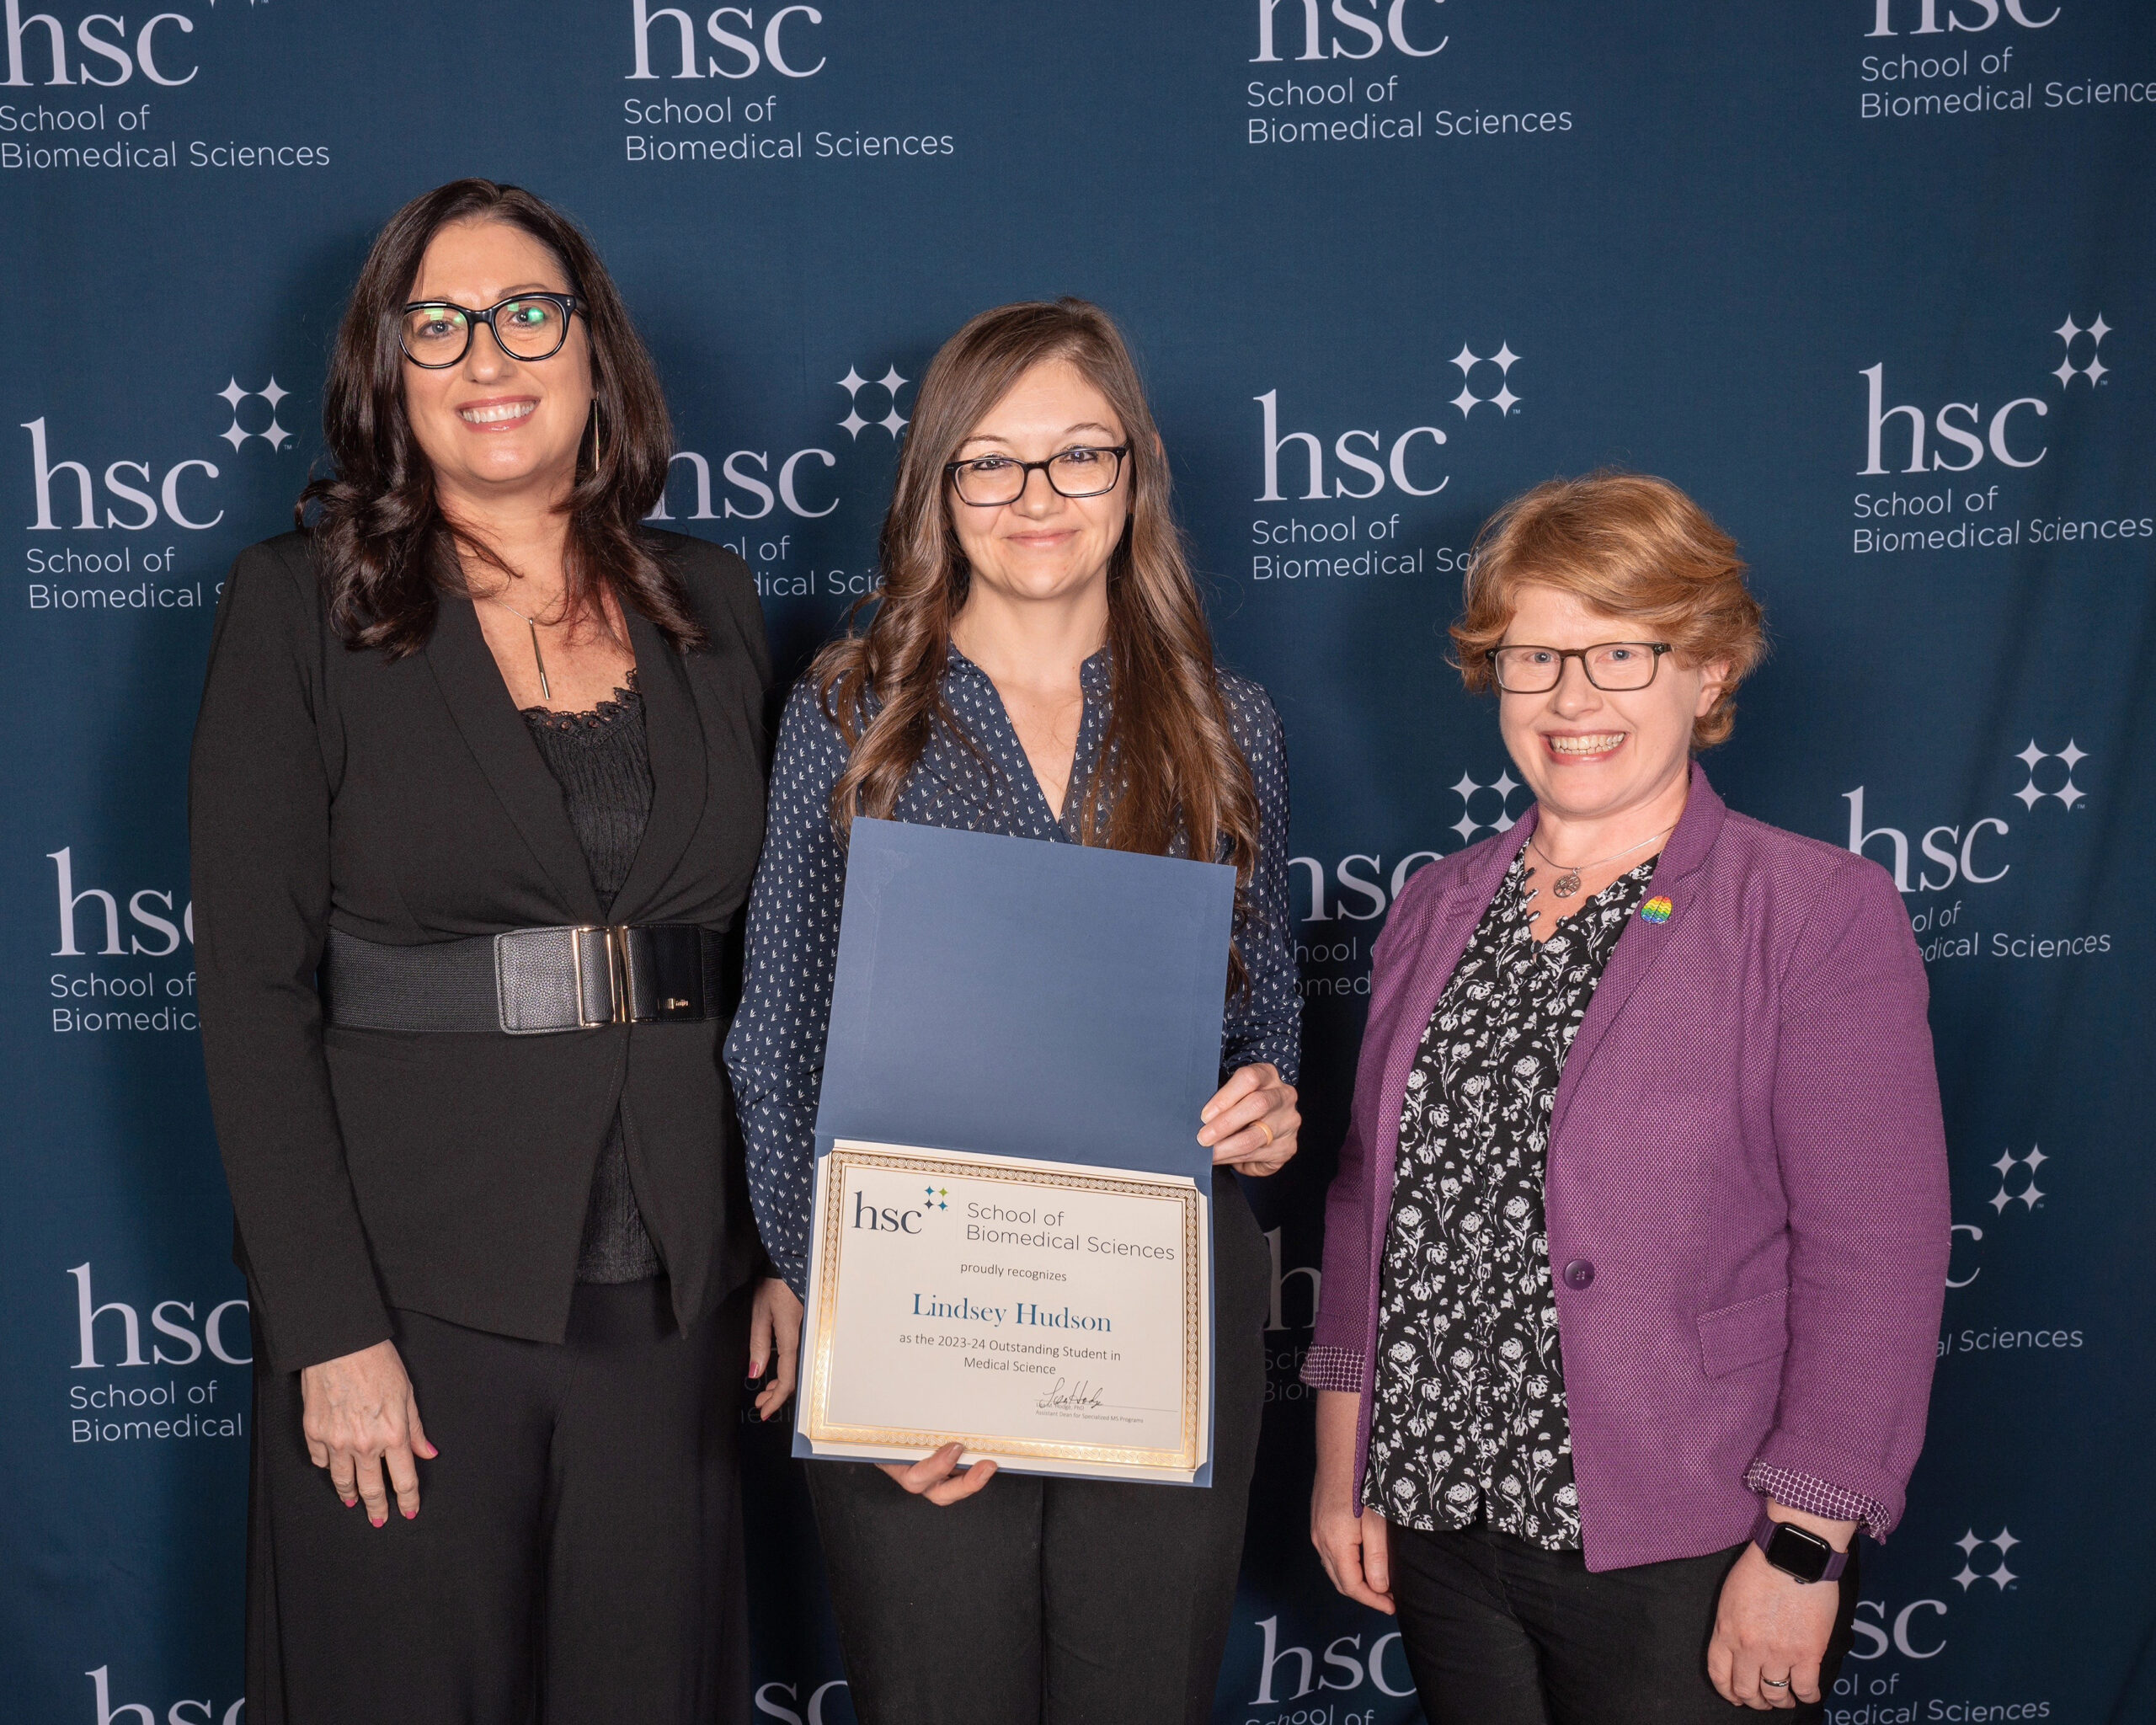 HSC School of Biomedical Science awards with Lindsey Hudson standing between two SBS faculty with her award